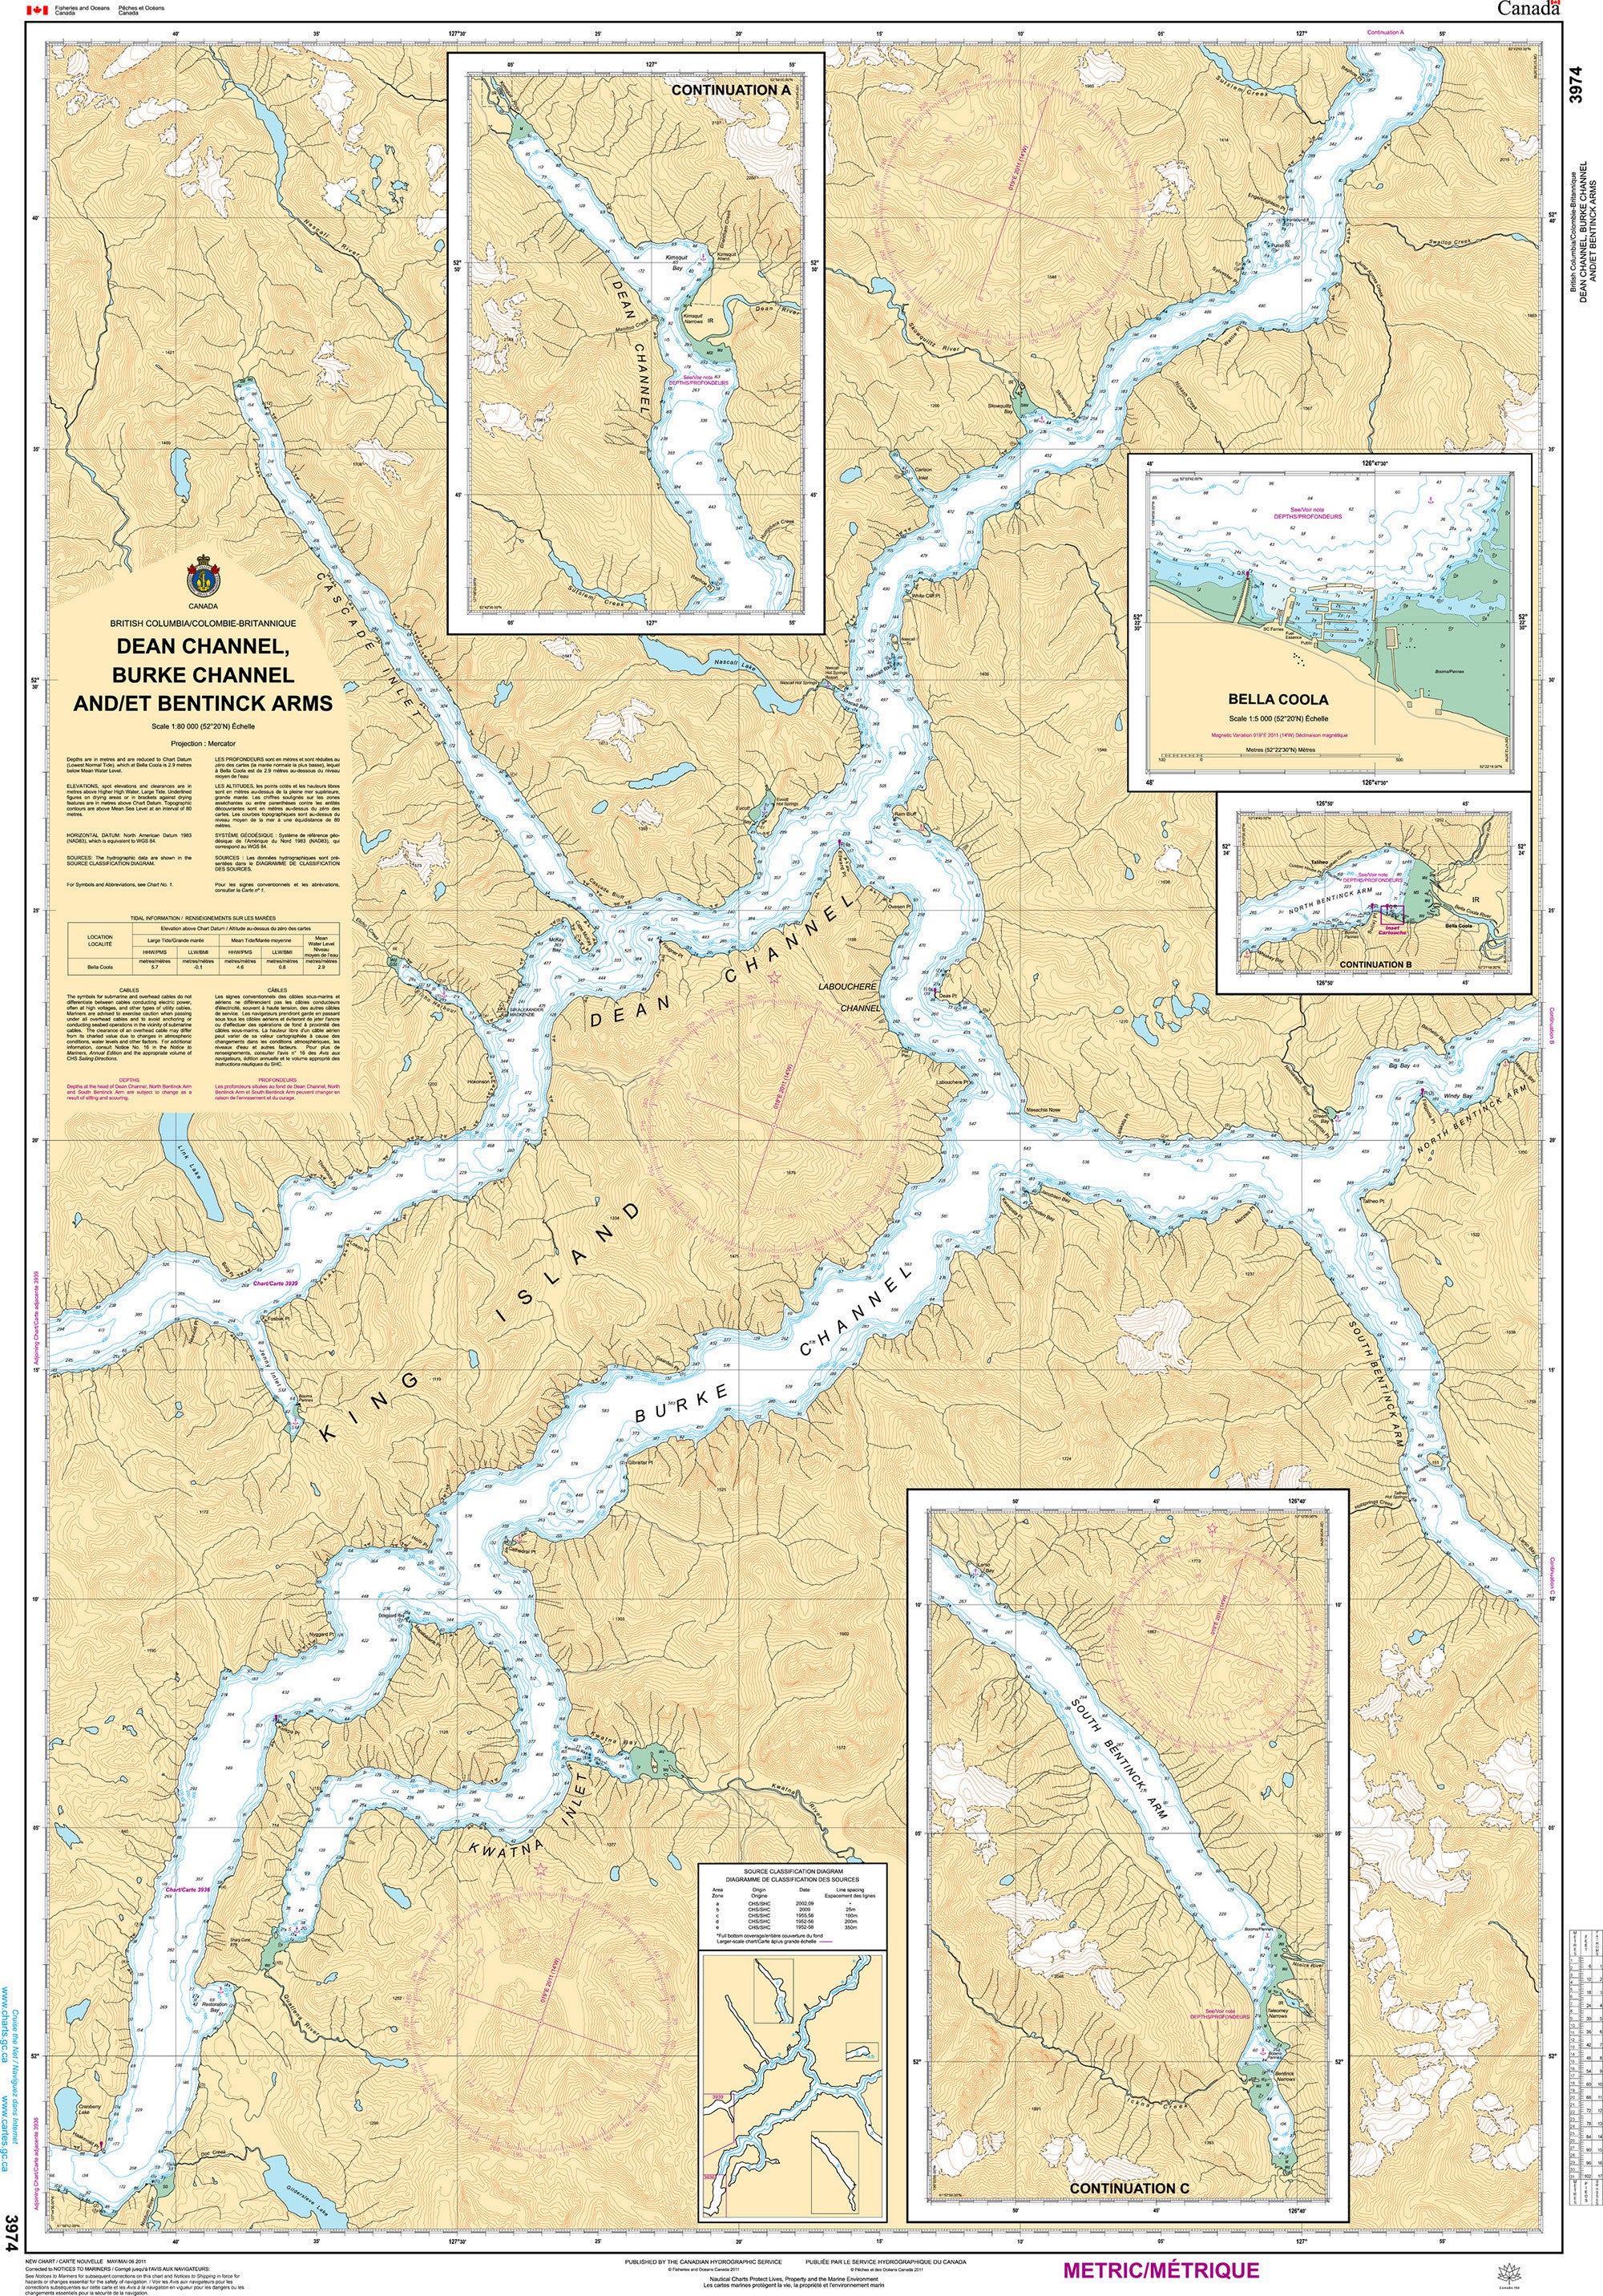 Canadian Hydrographic Service Nautical Chart CHS3974: Dean Channel, Burke Channel and/et Bentinck Arms